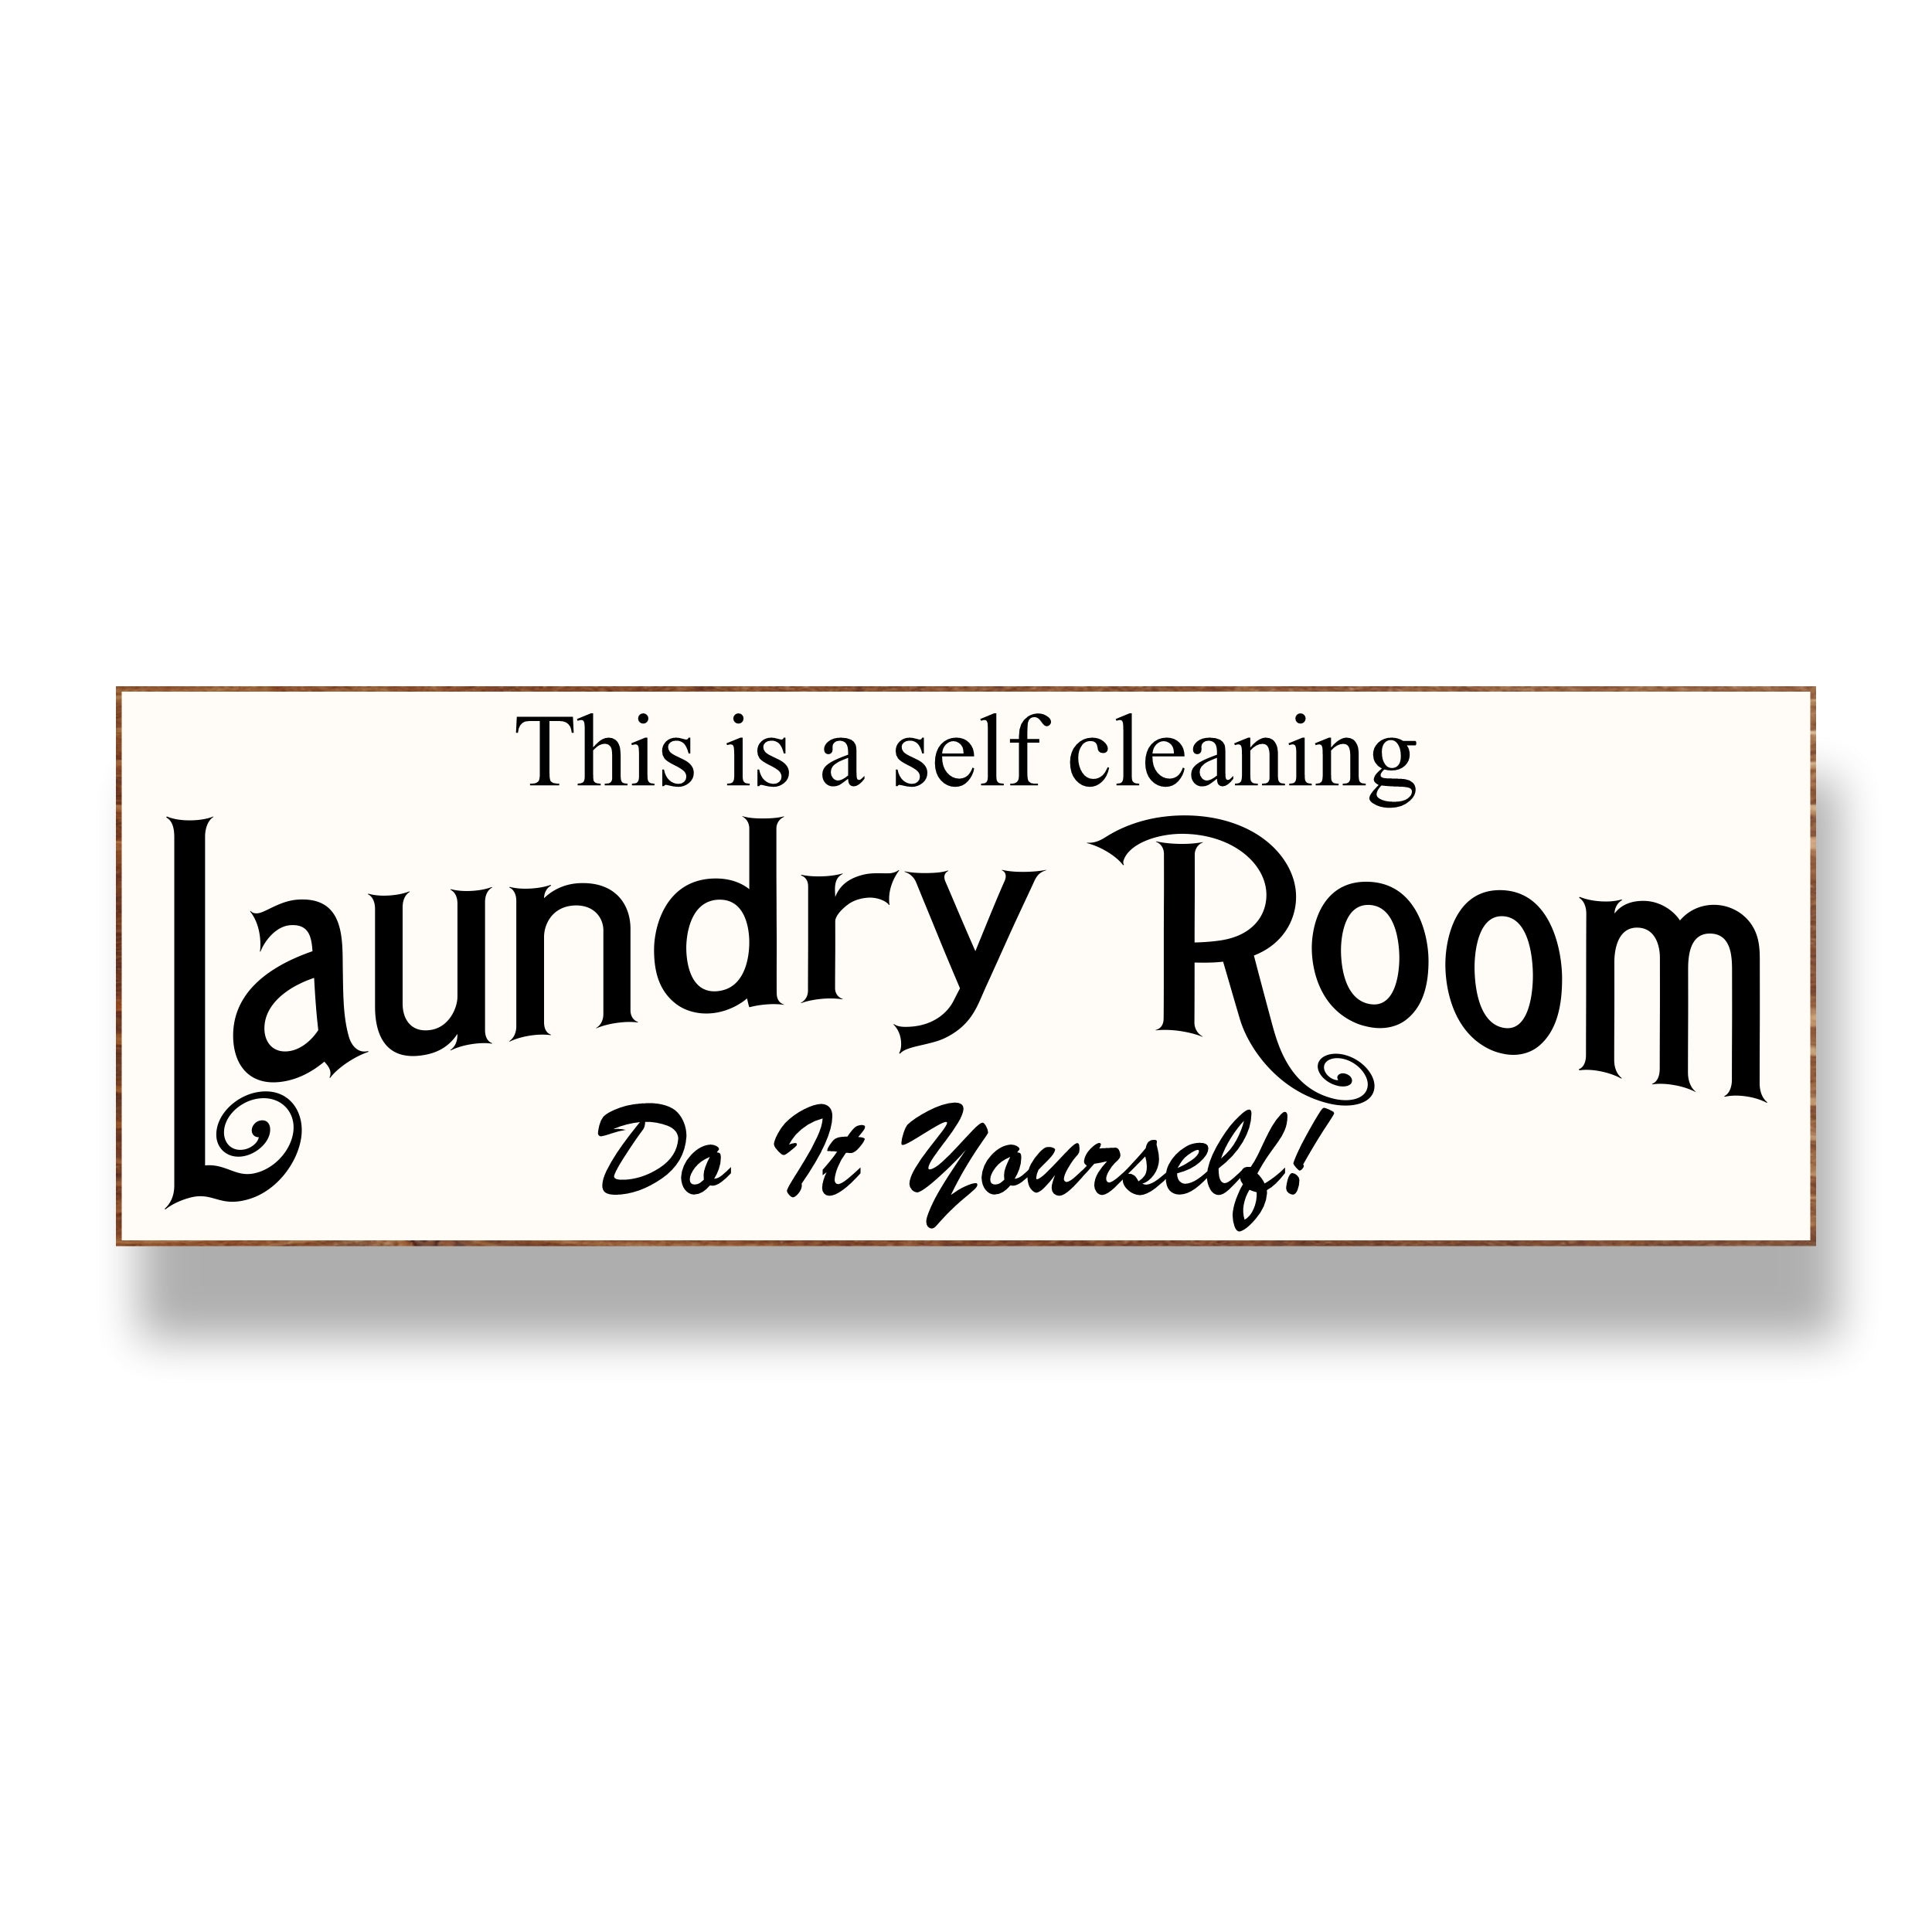 This is a Self Cleaning Laundry Room Sign